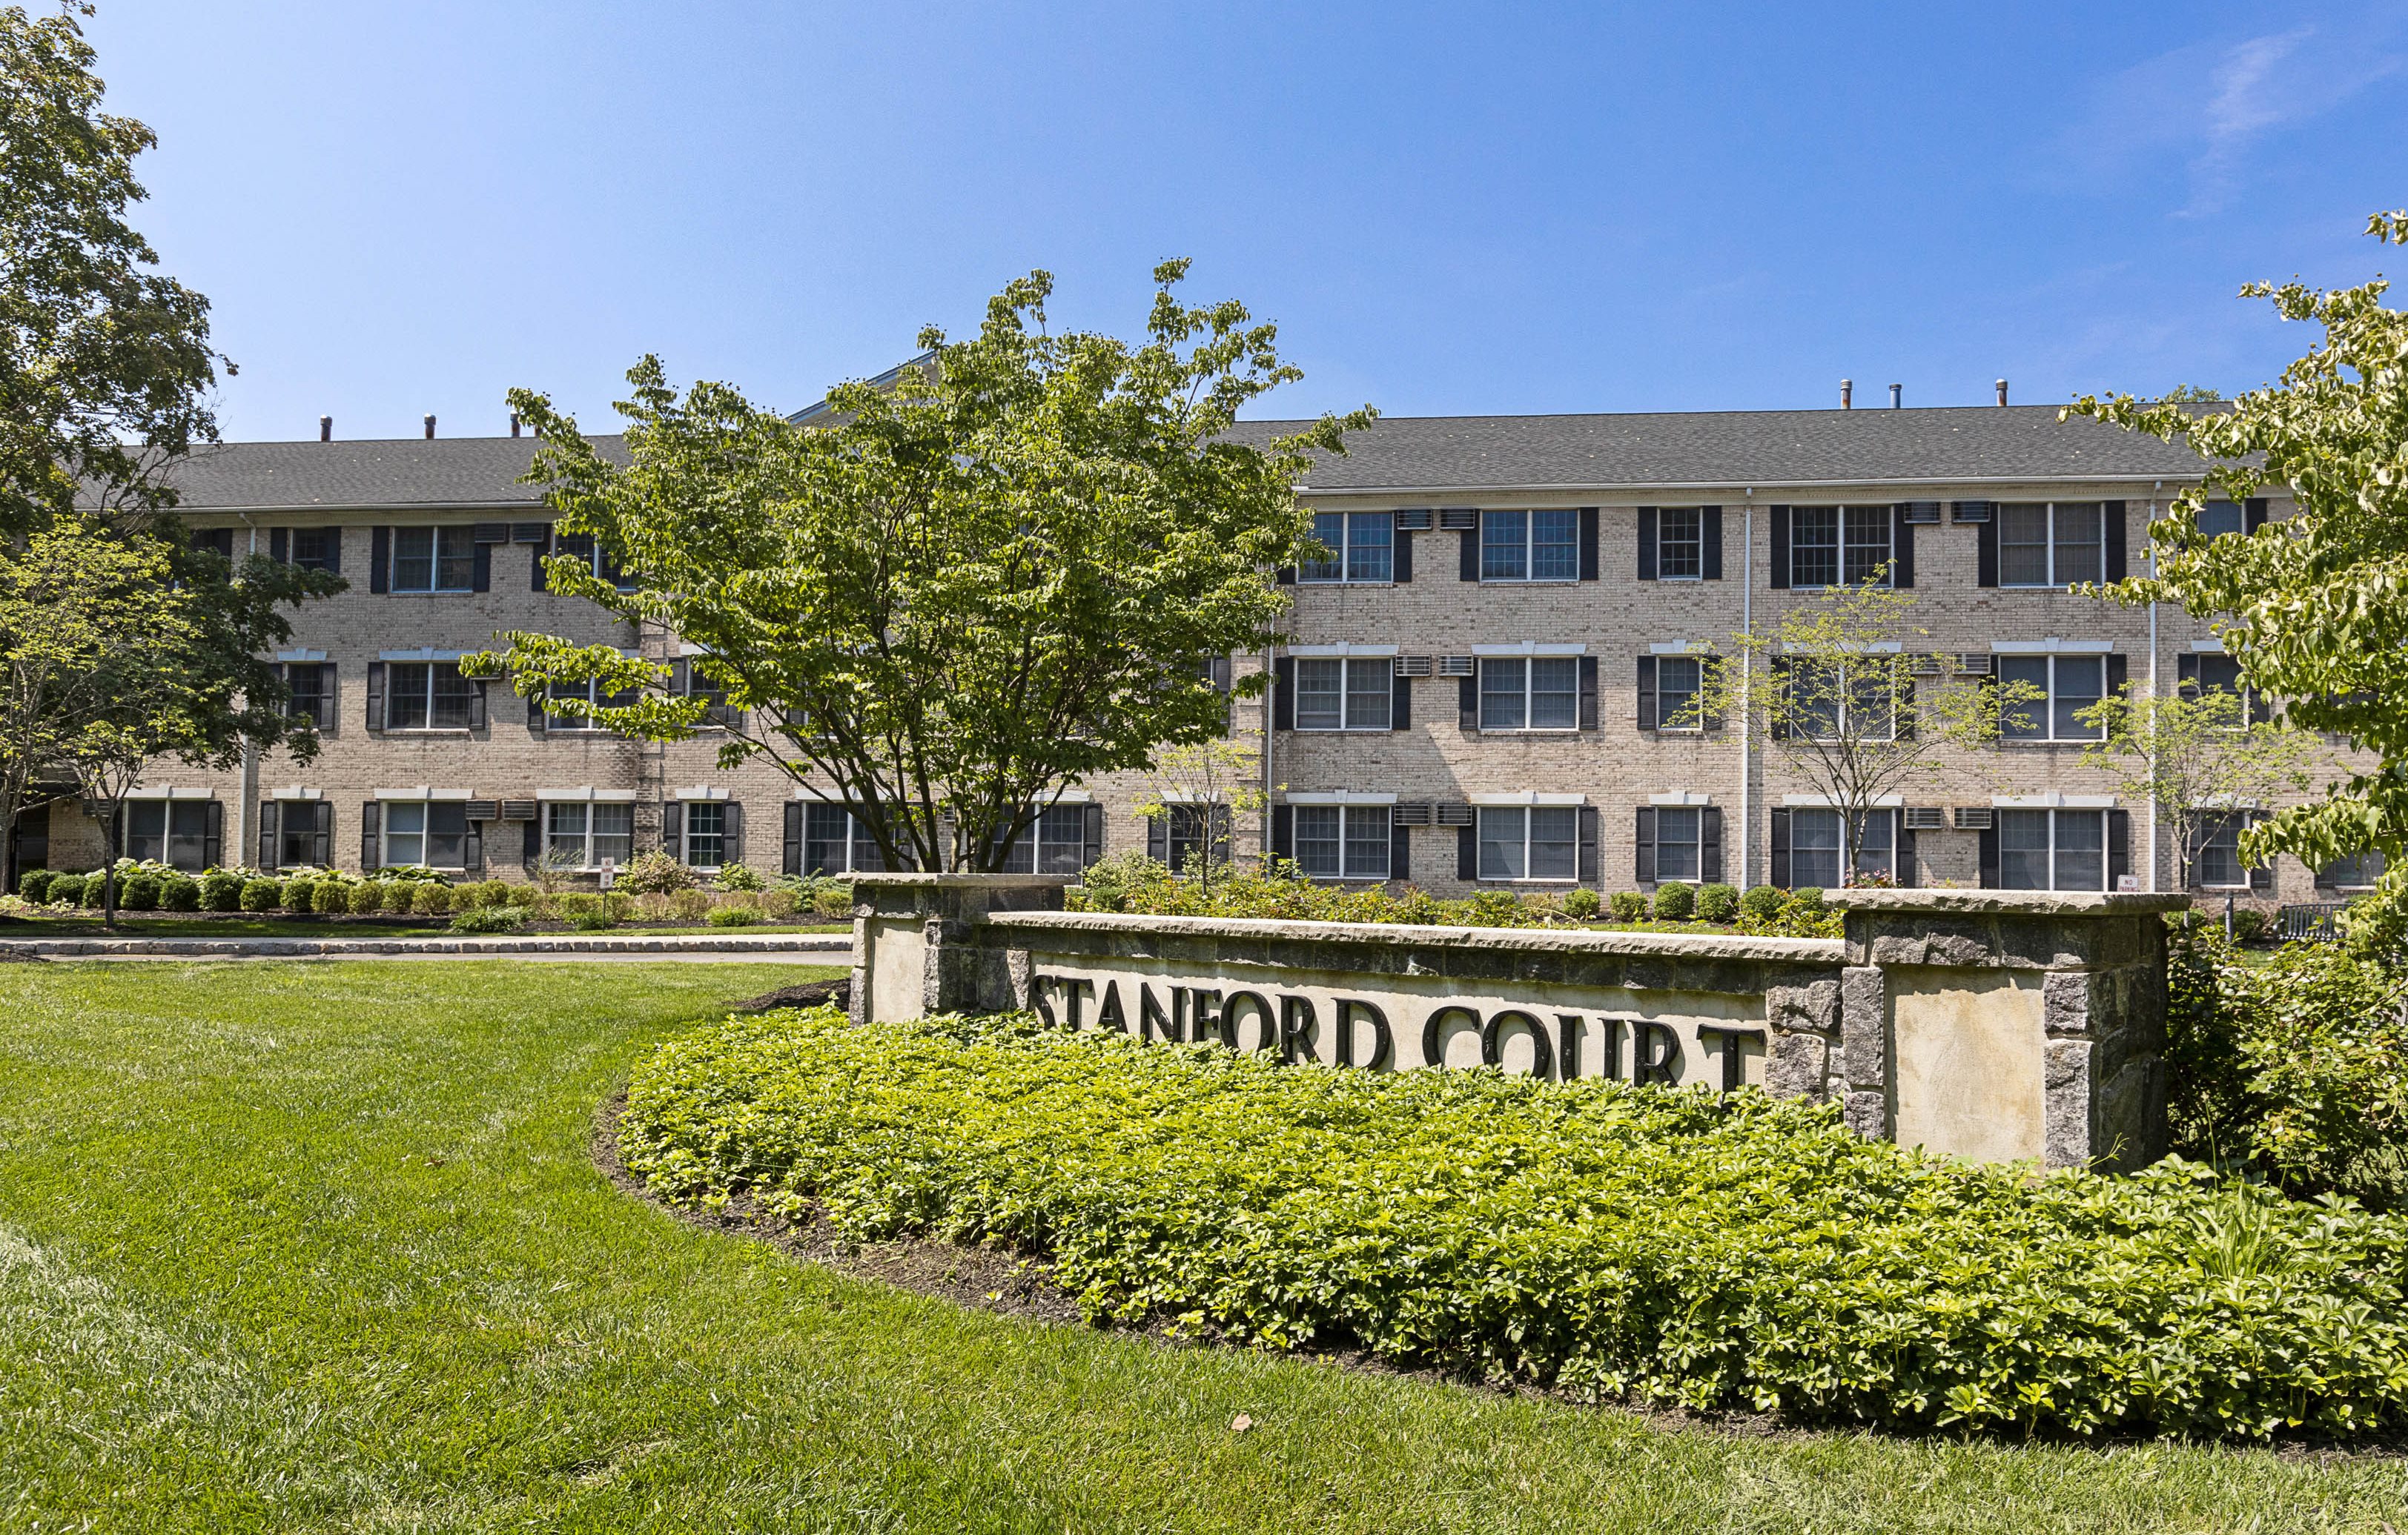 Stanford Court Apartments In Westwood Nj